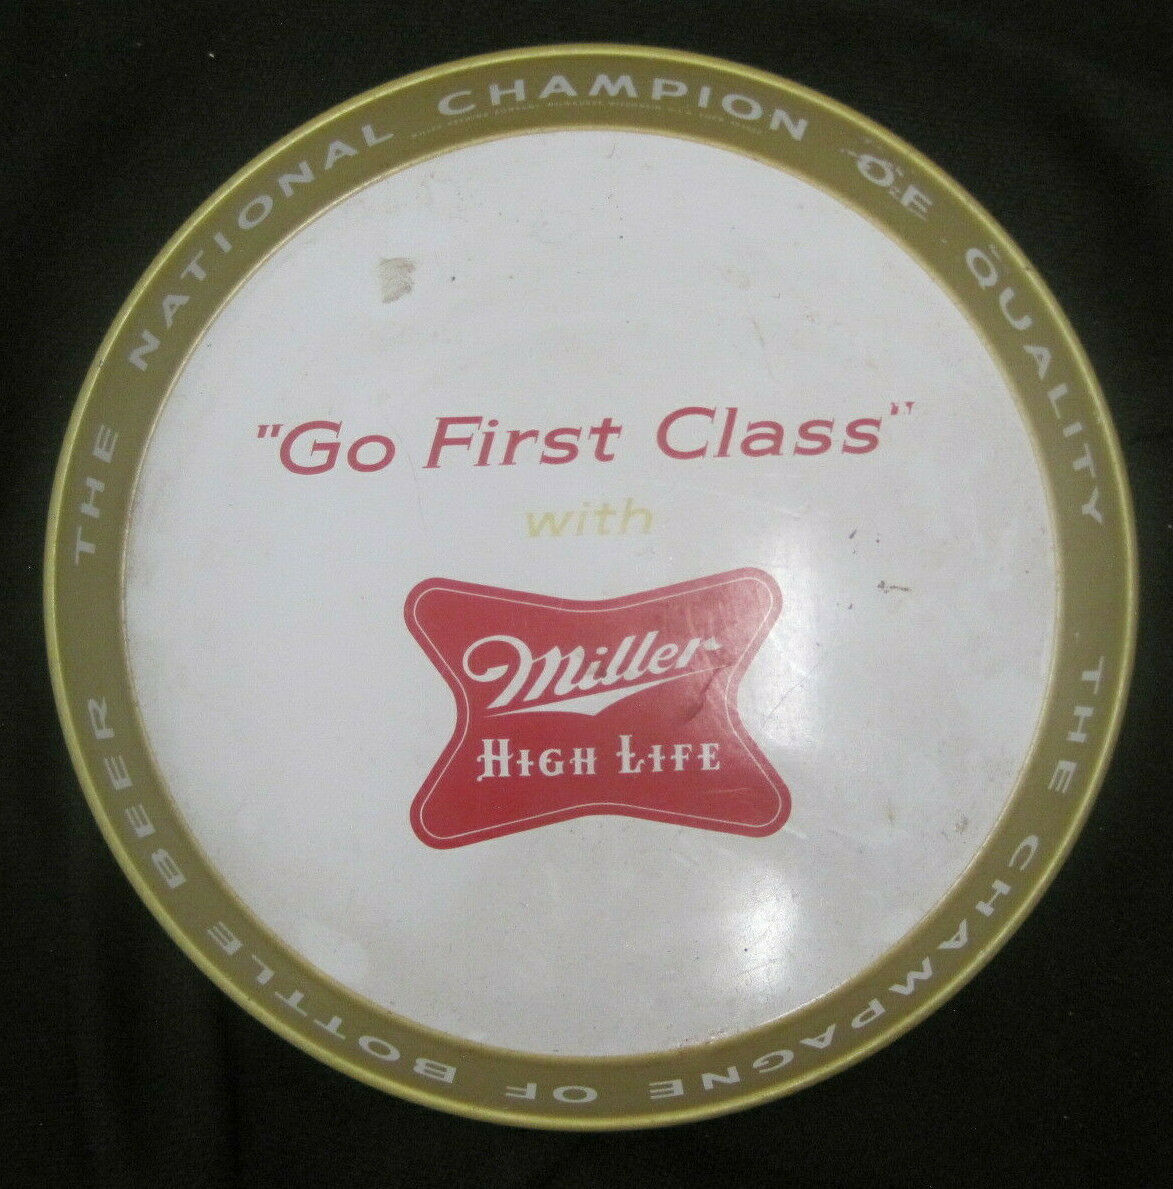 Vintage Miller High Life Go First Class Metal Beer Tray